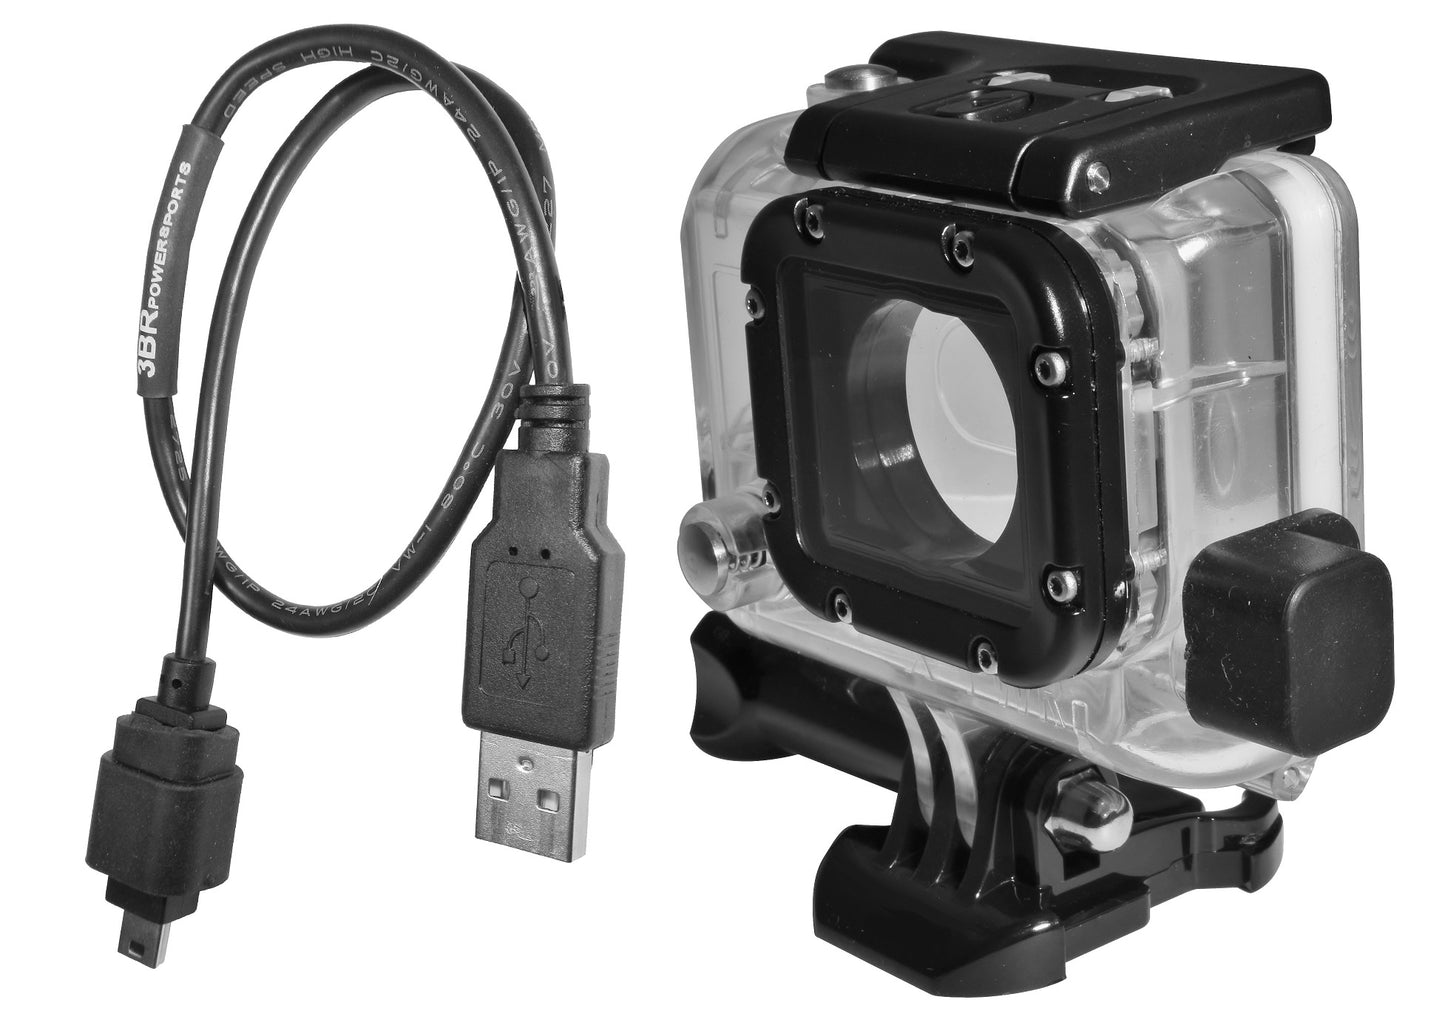 X~PWR™ All-weather, External Power Case for GoPro HERO3, HERO3+, & HERO4 cameras